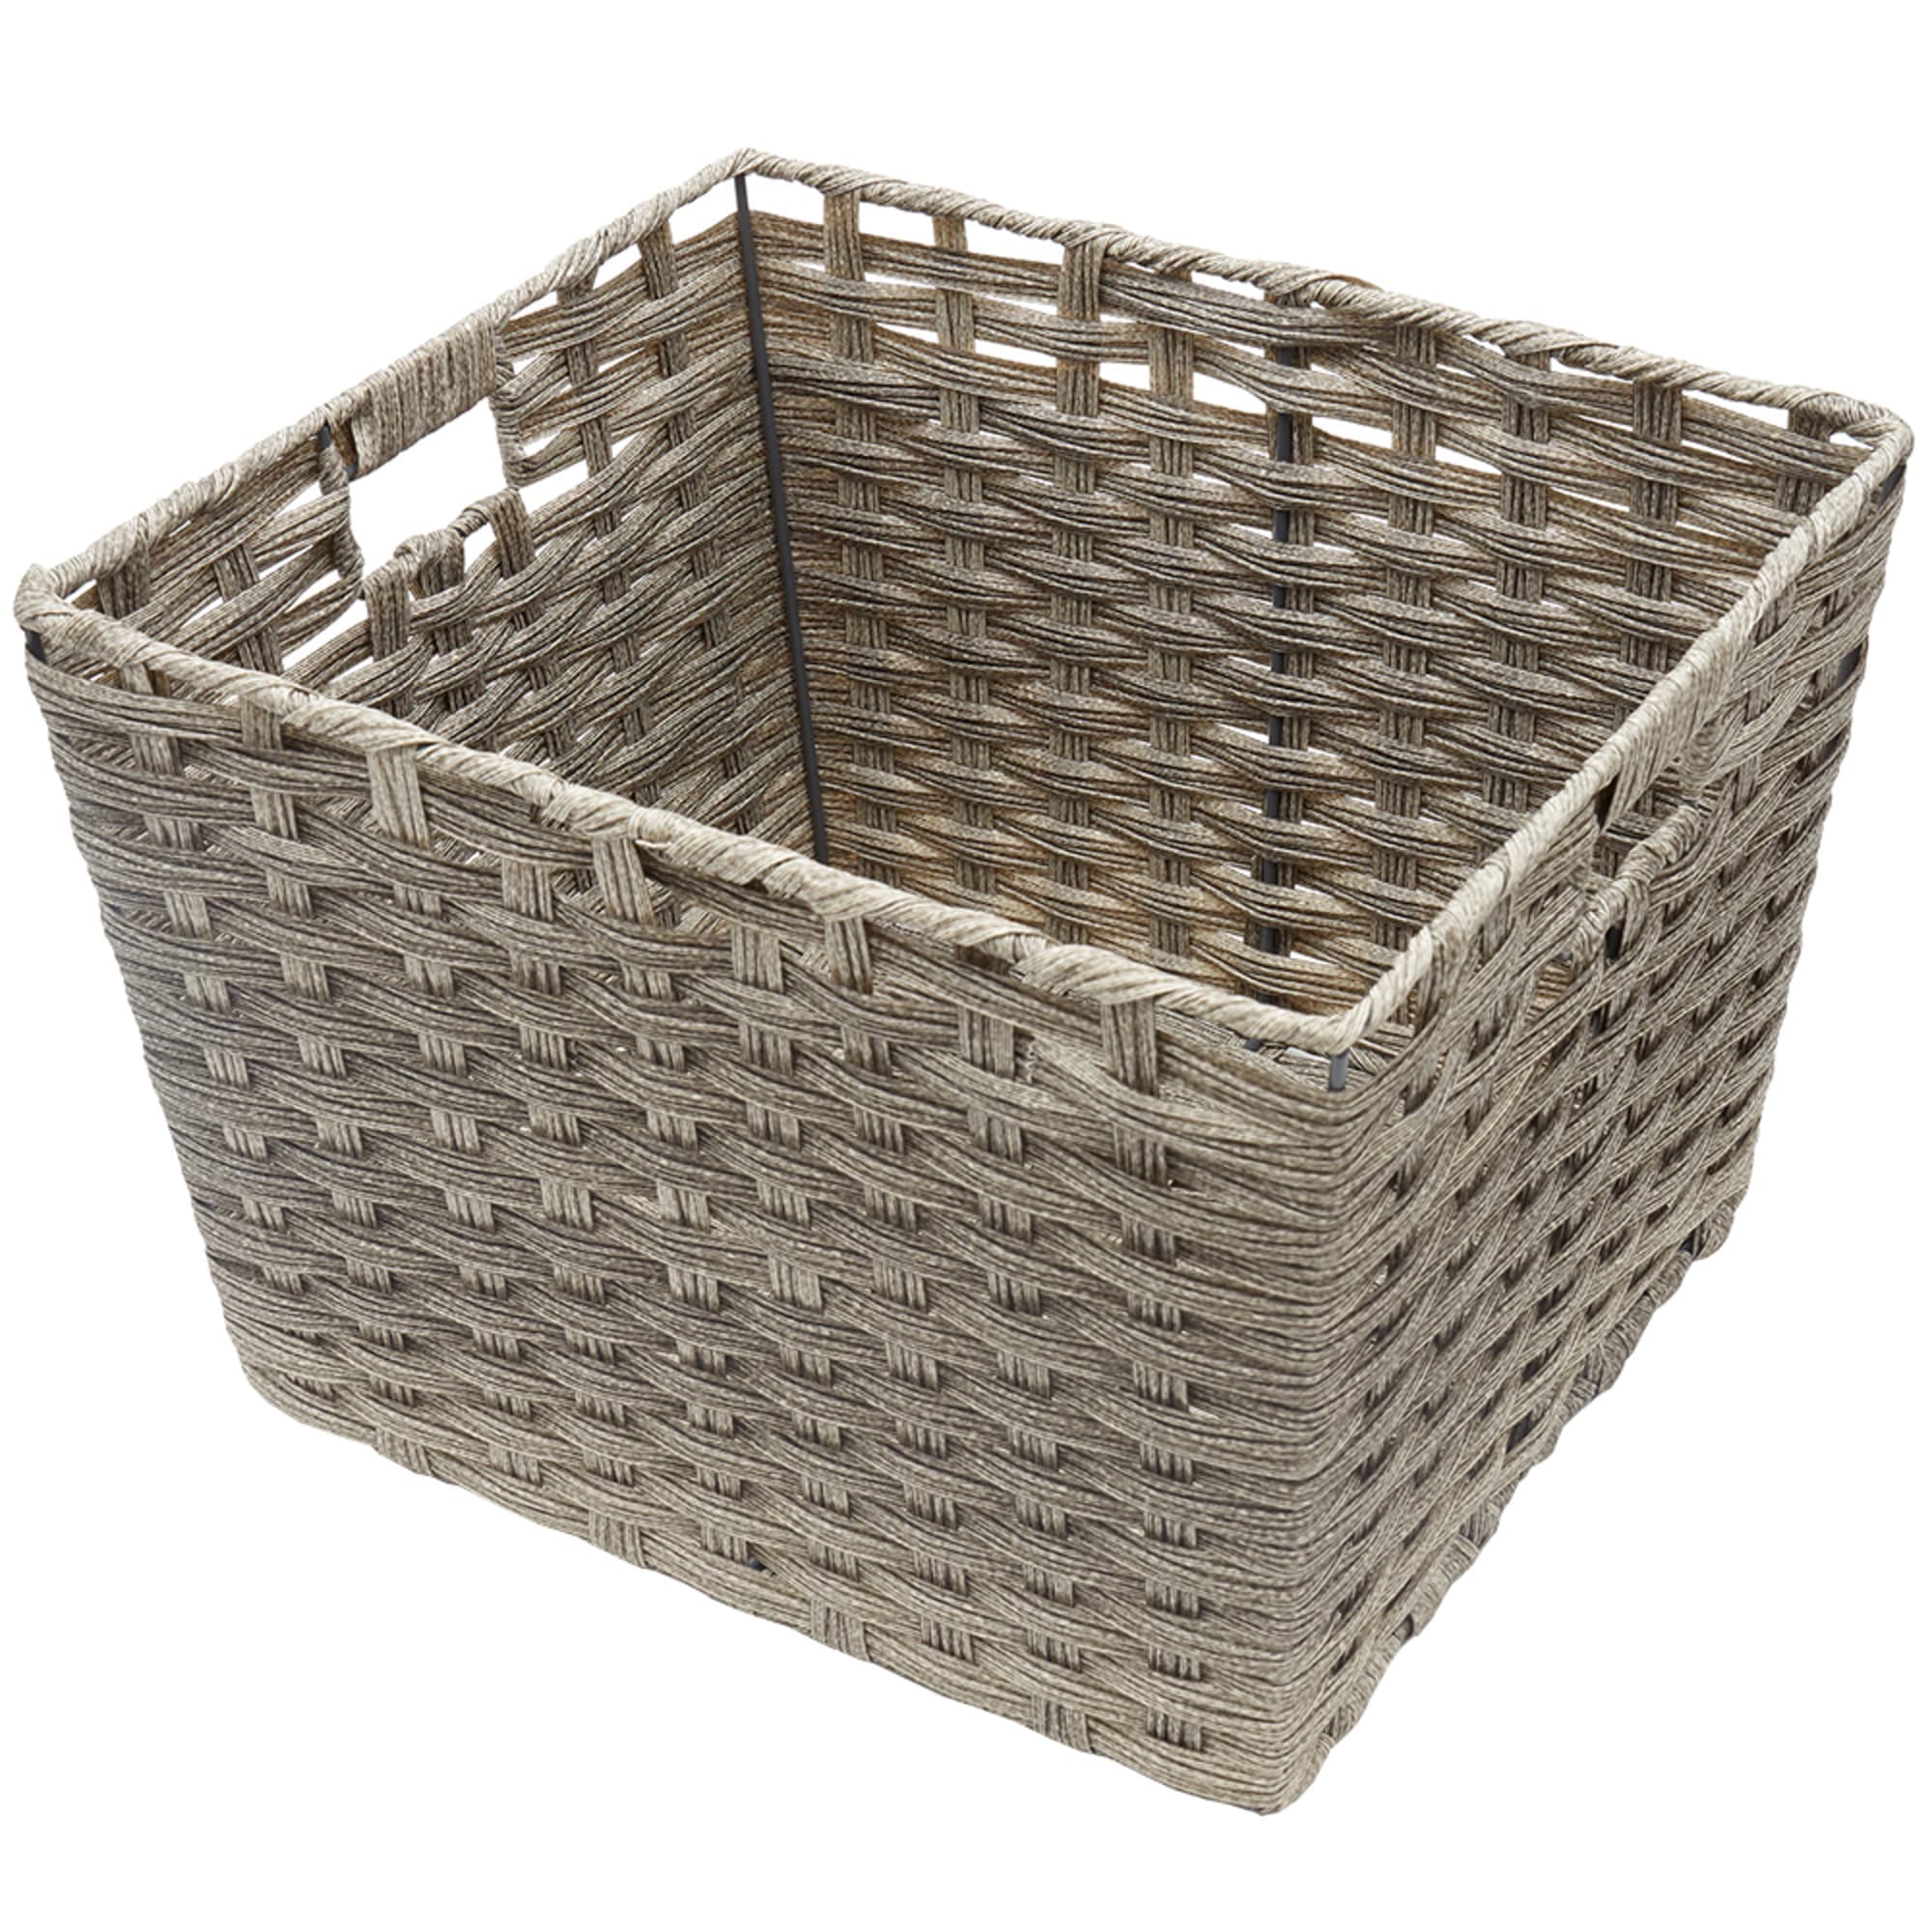 Home Basics X-large Faux Rattan Basket with Cut-out Handles, Grey $15.00 EACH, CASE PACK OF 6